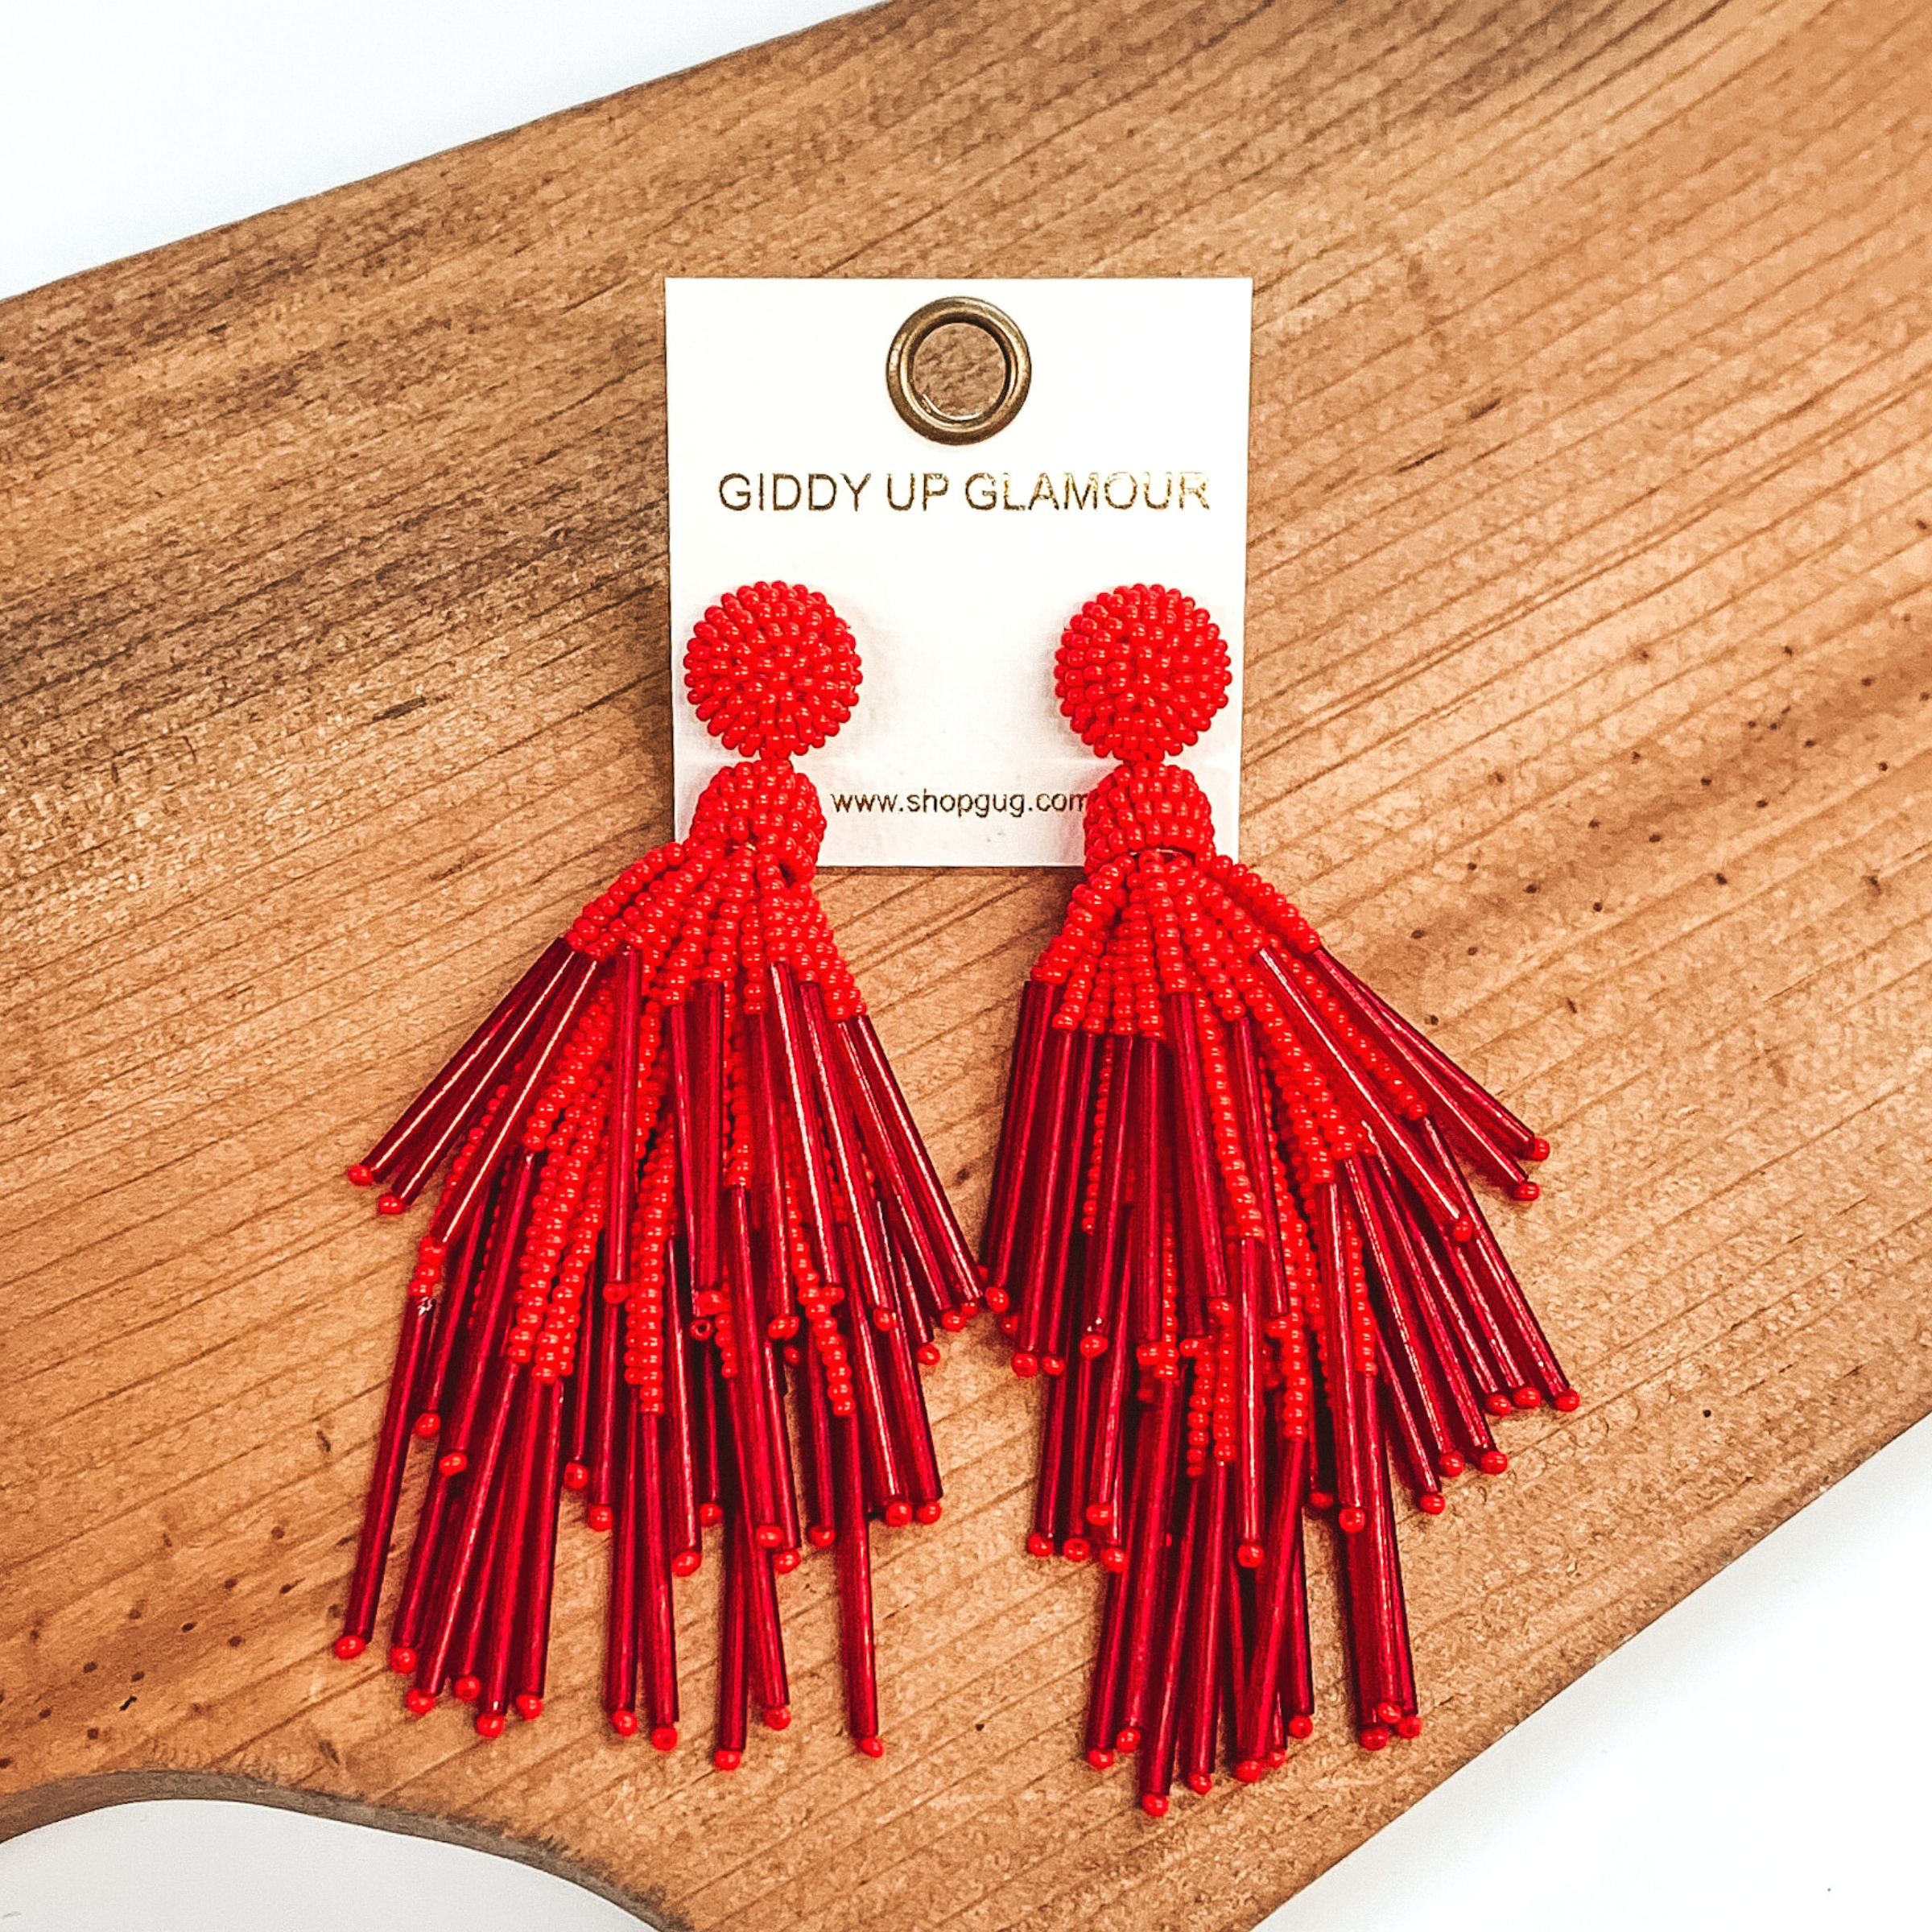 Circle beaded stud earrings with a beaded tassel in red. These earrings are pictured laying on a brown piece of wood on a white background.